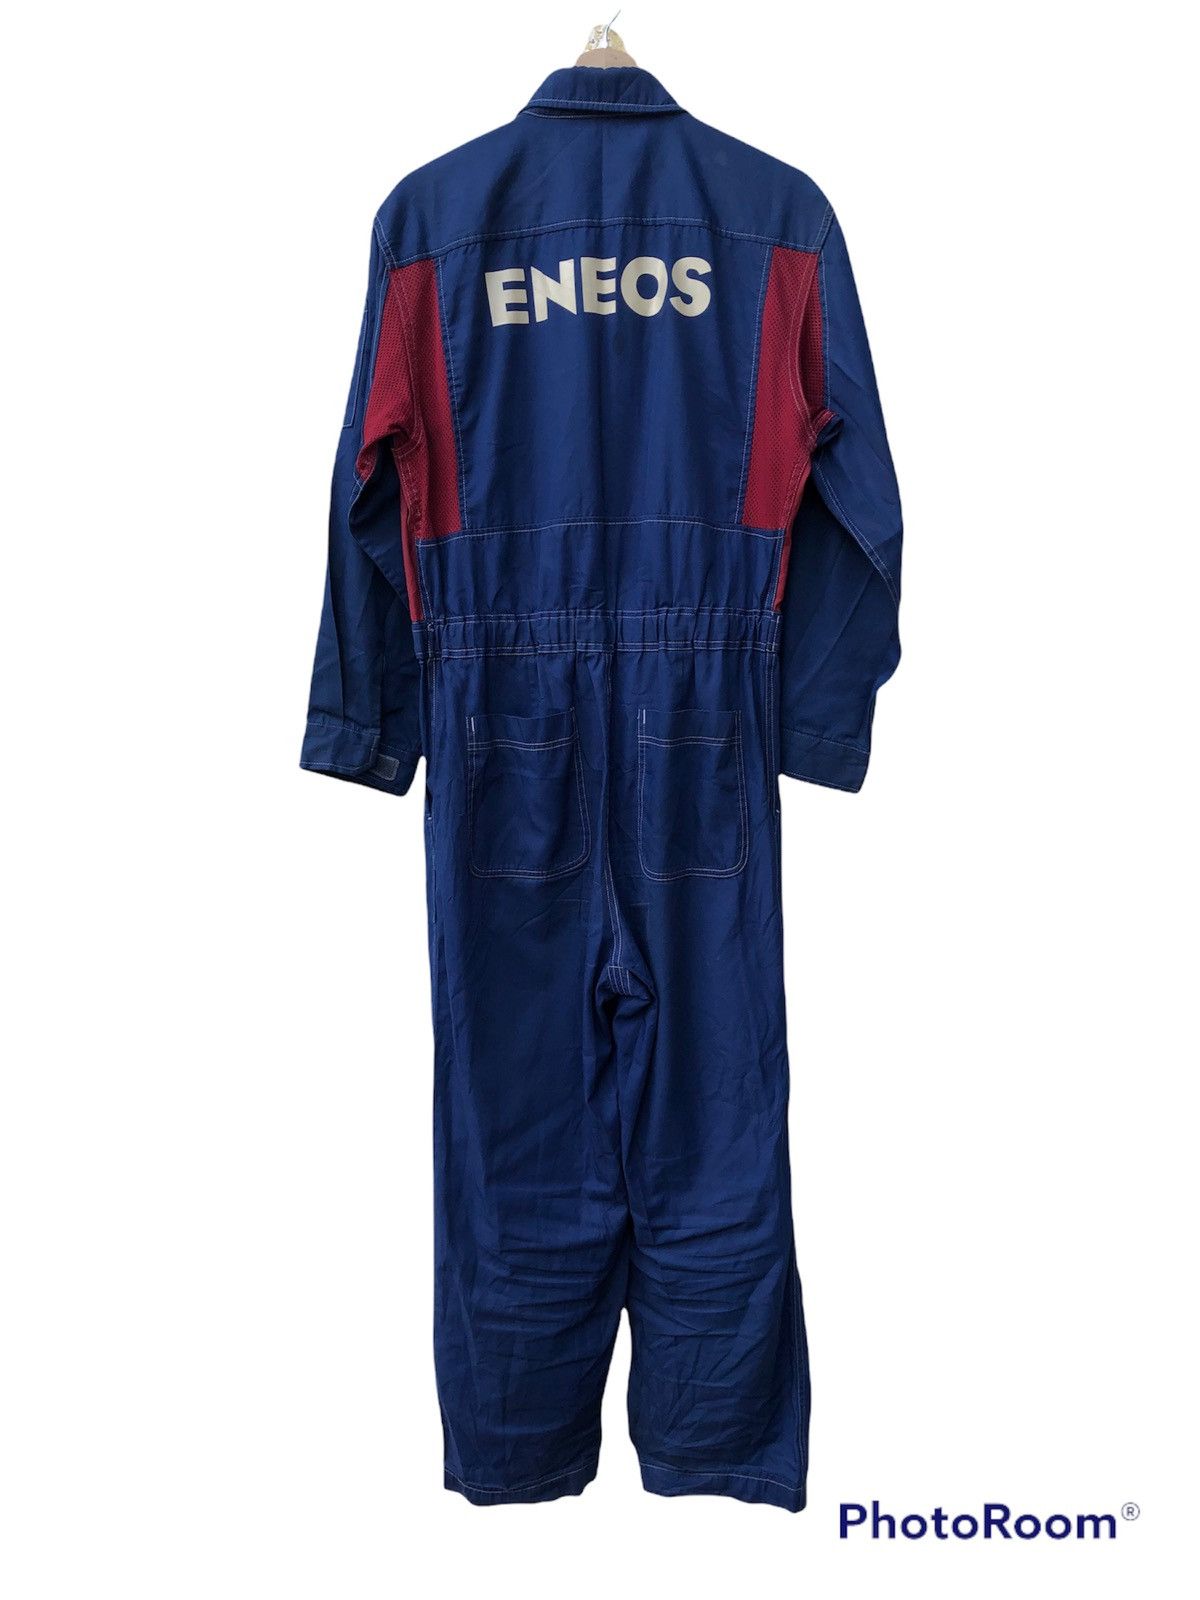 Sports Specialties - Japanese brans eneos workwear overall suit - 2